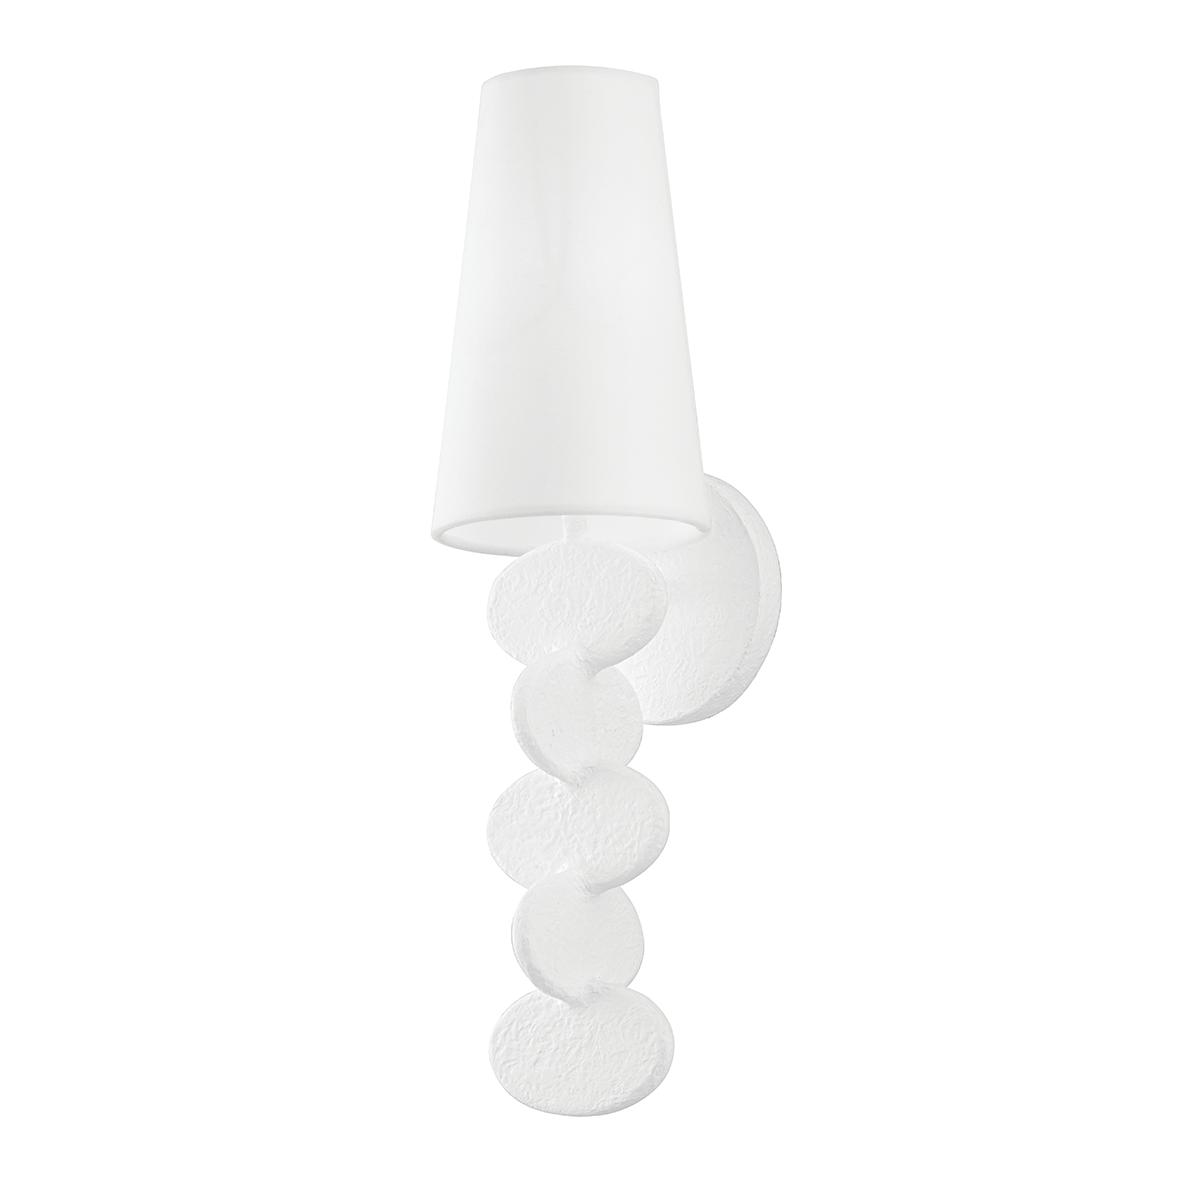 Troy Lighting Ellios Wall Sconce Wall Sconce Troy Lighting GESSO WHITE 4.75x4.75x18 